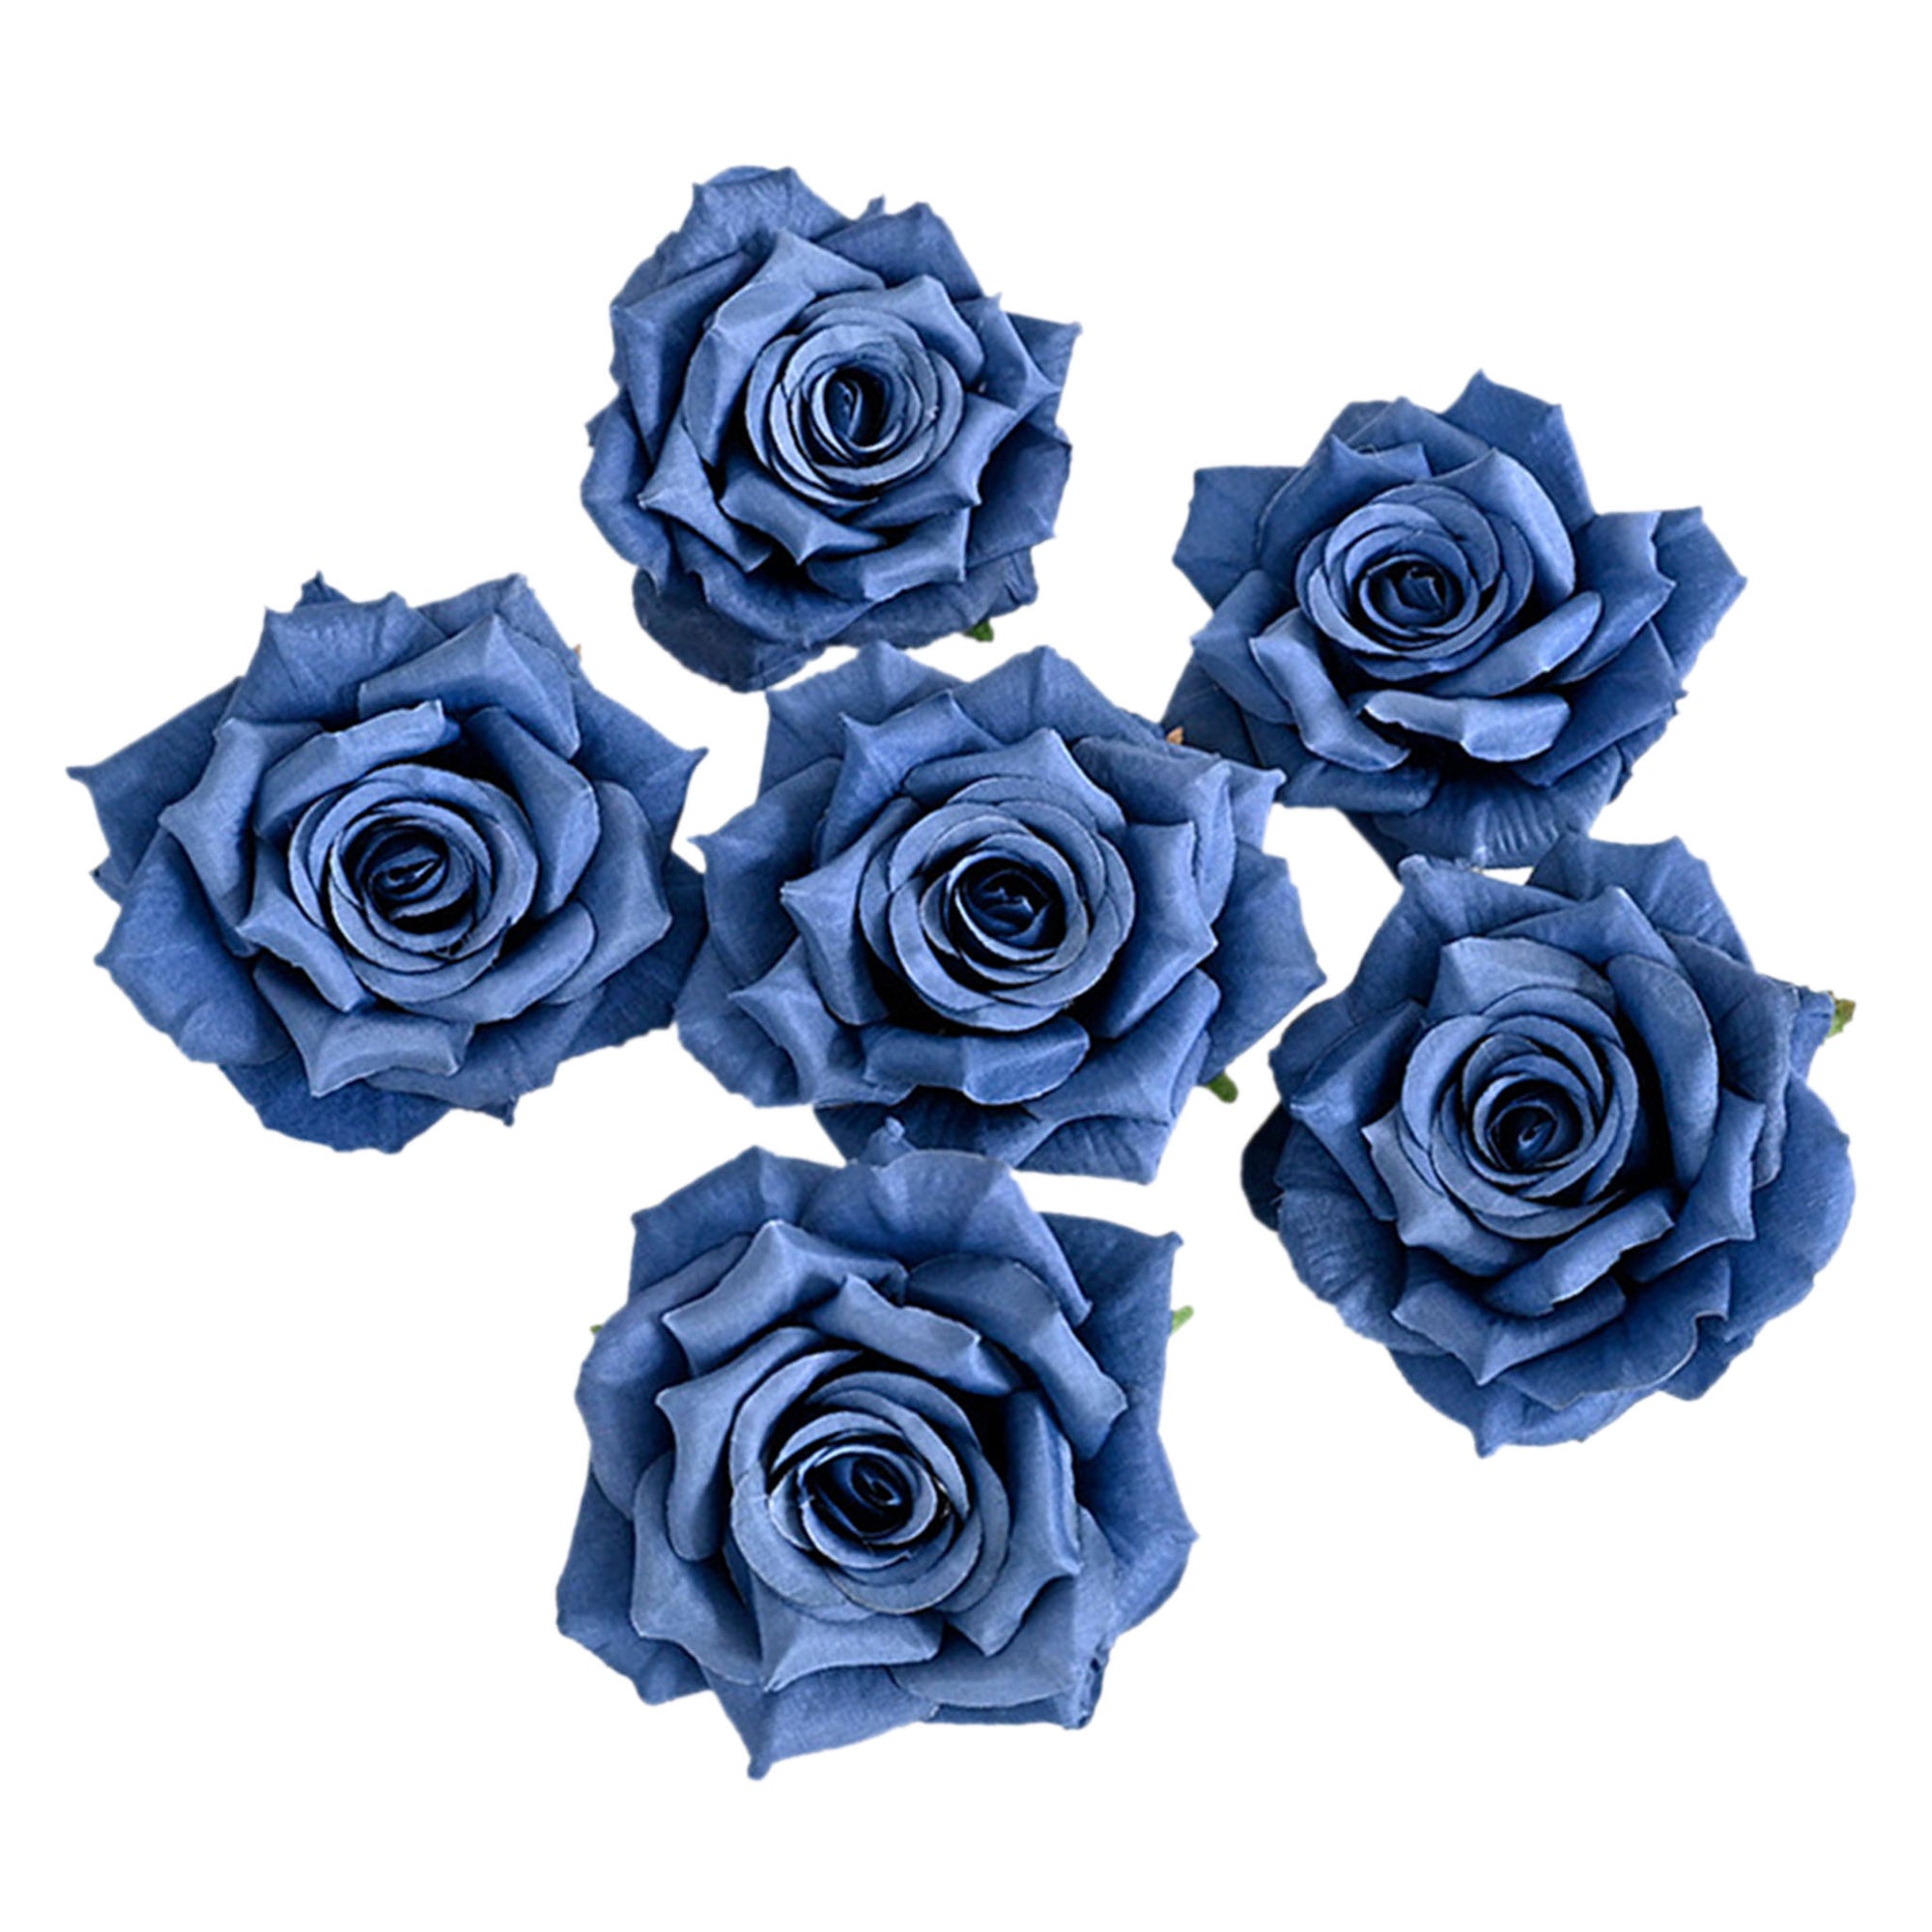 Wholesale Silk Flat Roses Artificial Flowers Crafts